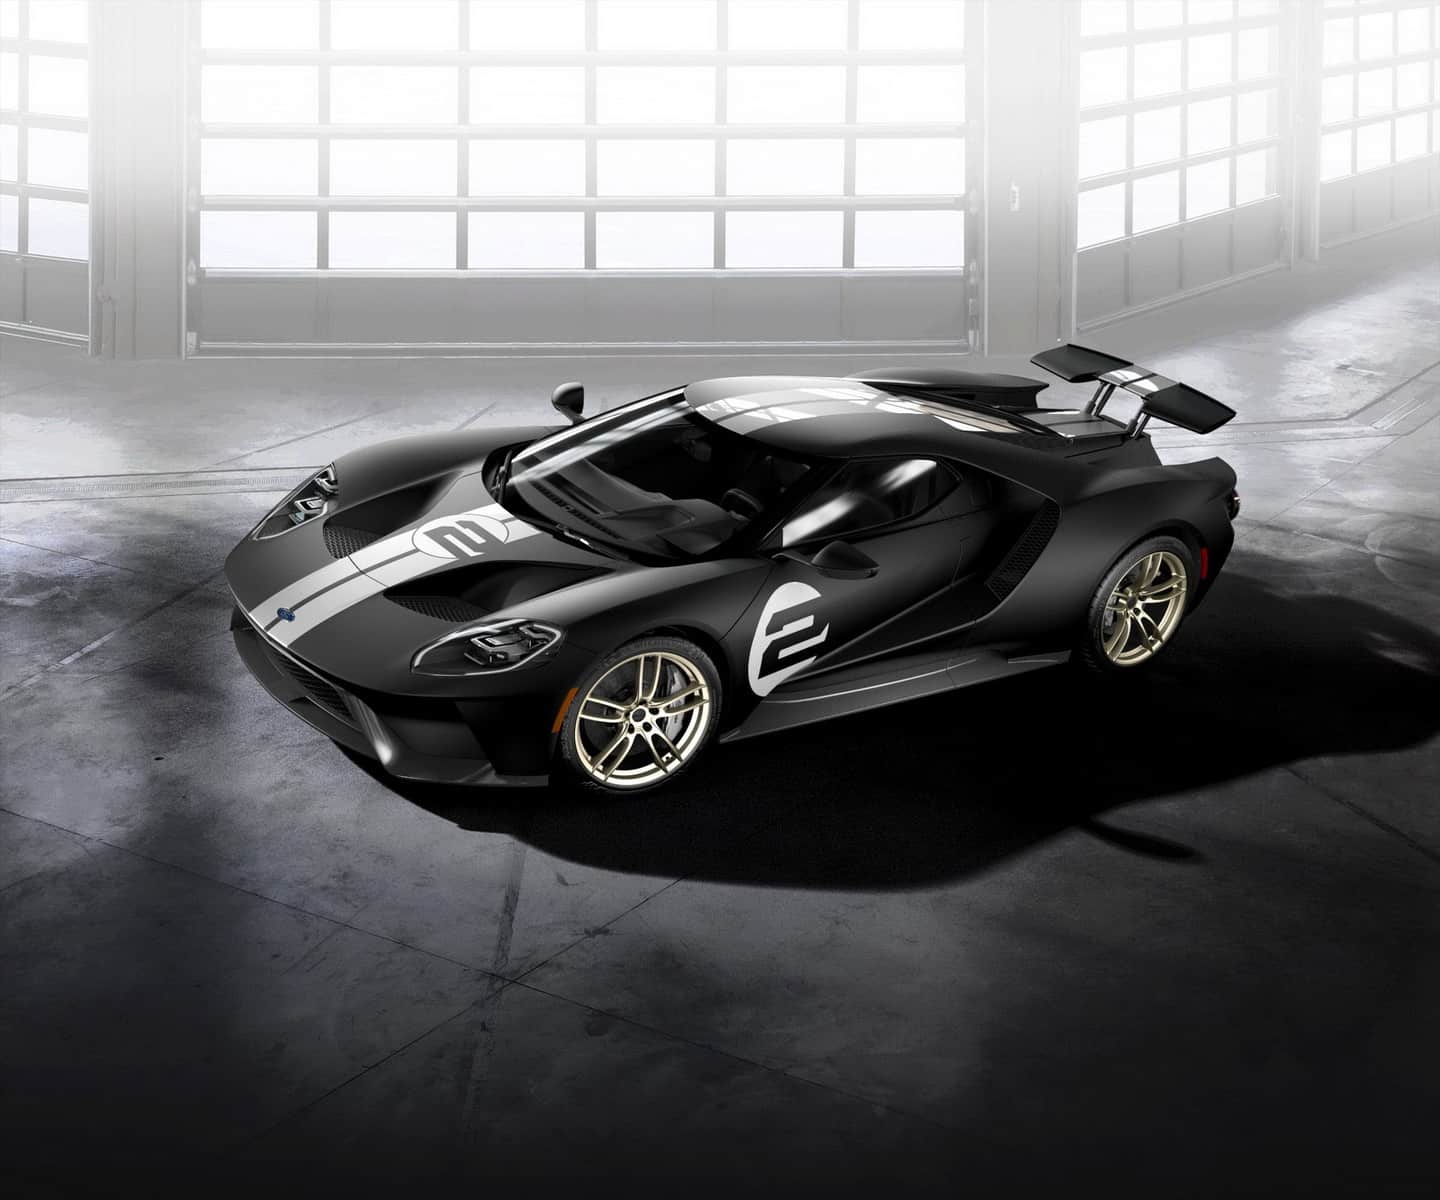 official-2017-ford-gt-66-heritage-edition-4